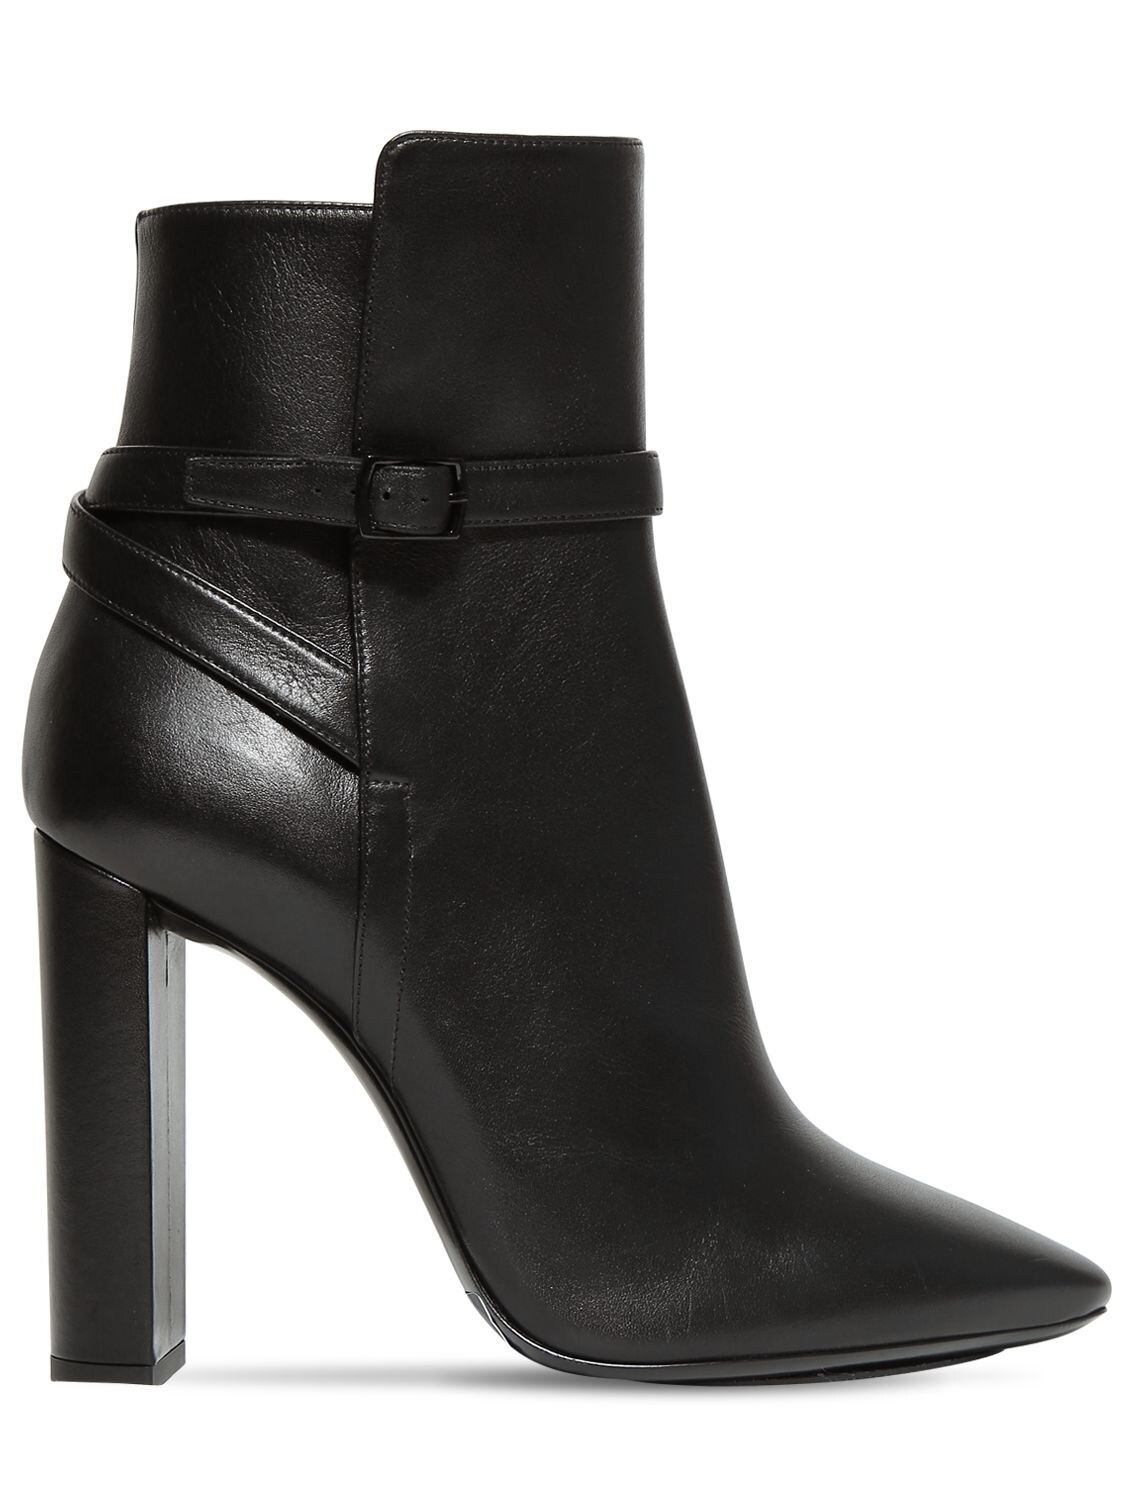 Saint Laurent 105mm Soixante Seize Leather Ankle Boots In Black